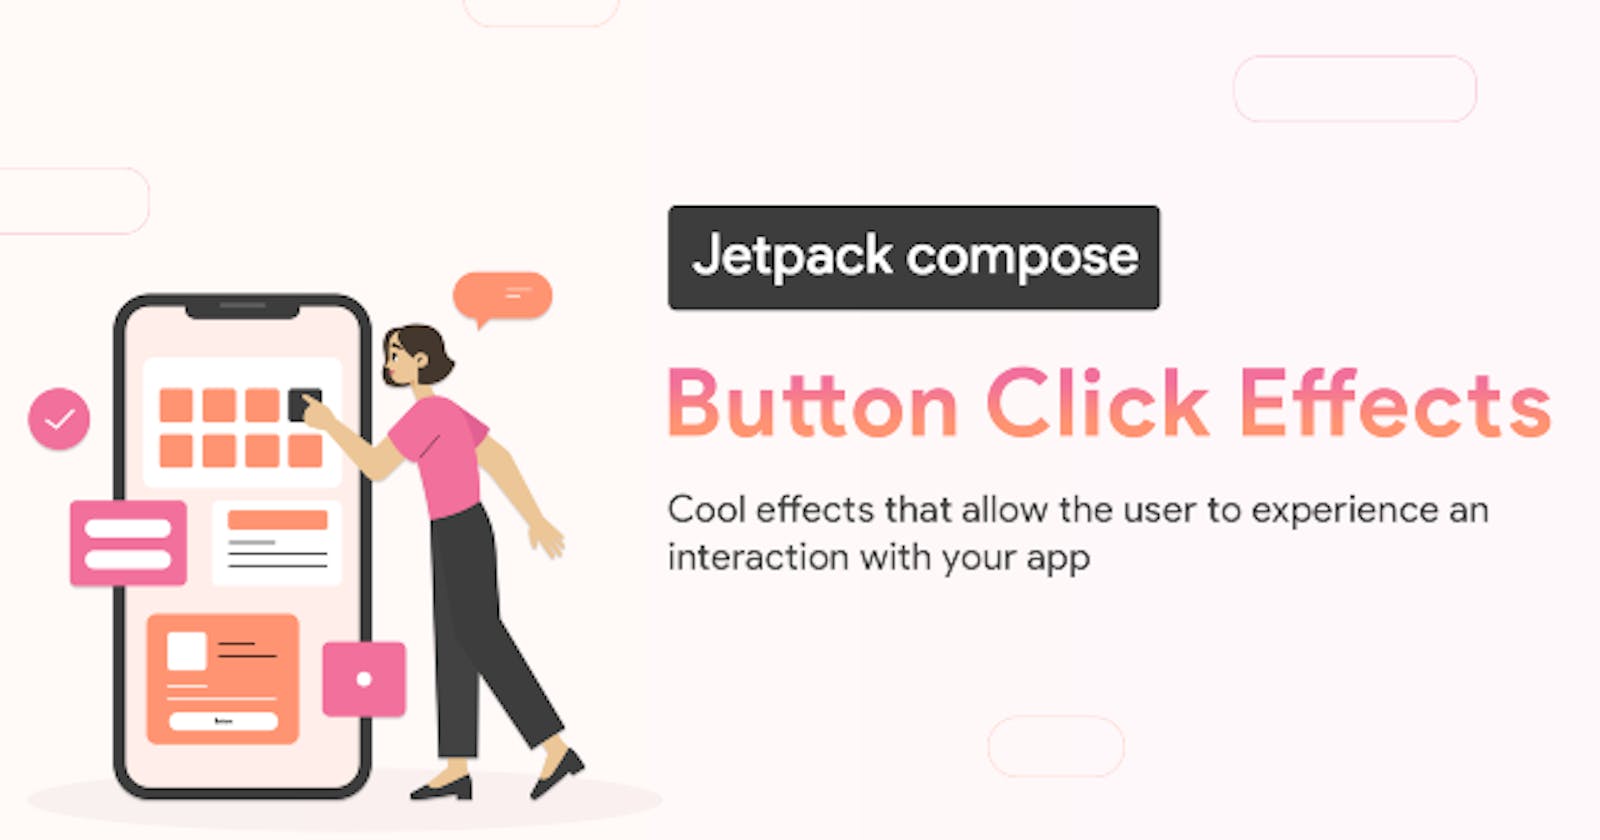 Jetpack compose: Cool Button Click Effects